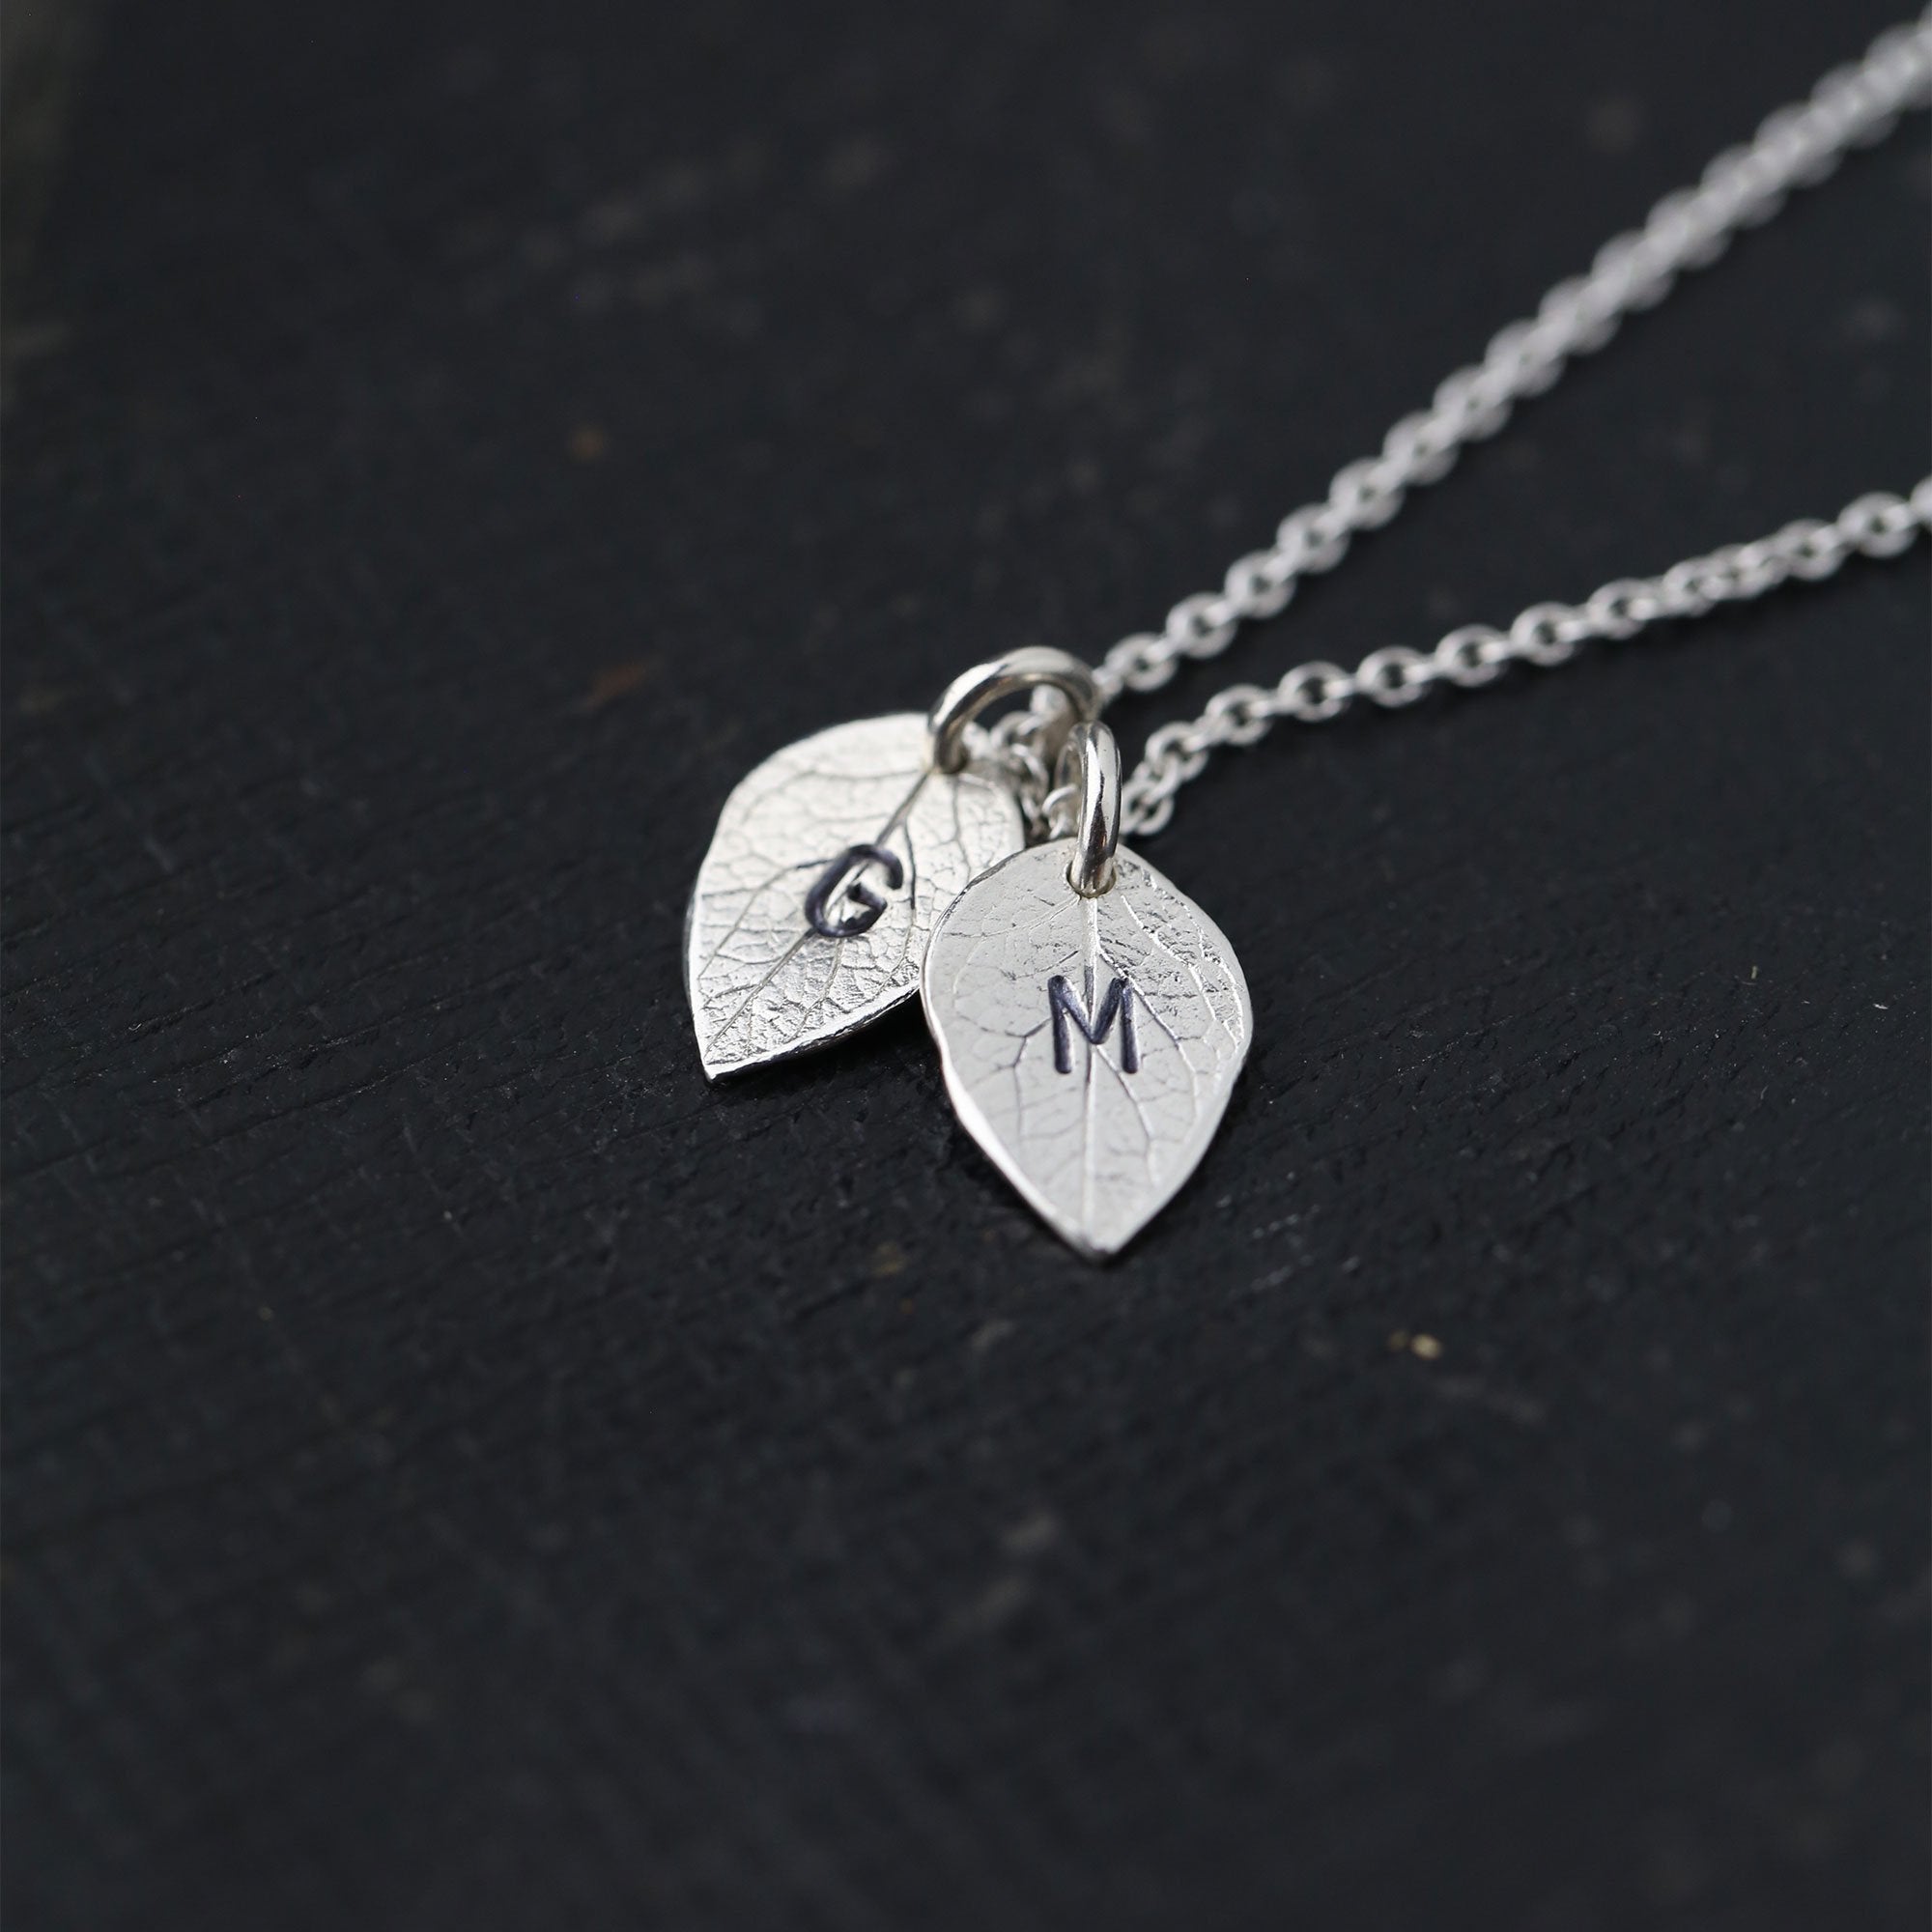 Hand Stamped Initials Leaf Necklace - Handmade Jewelry by Burnish